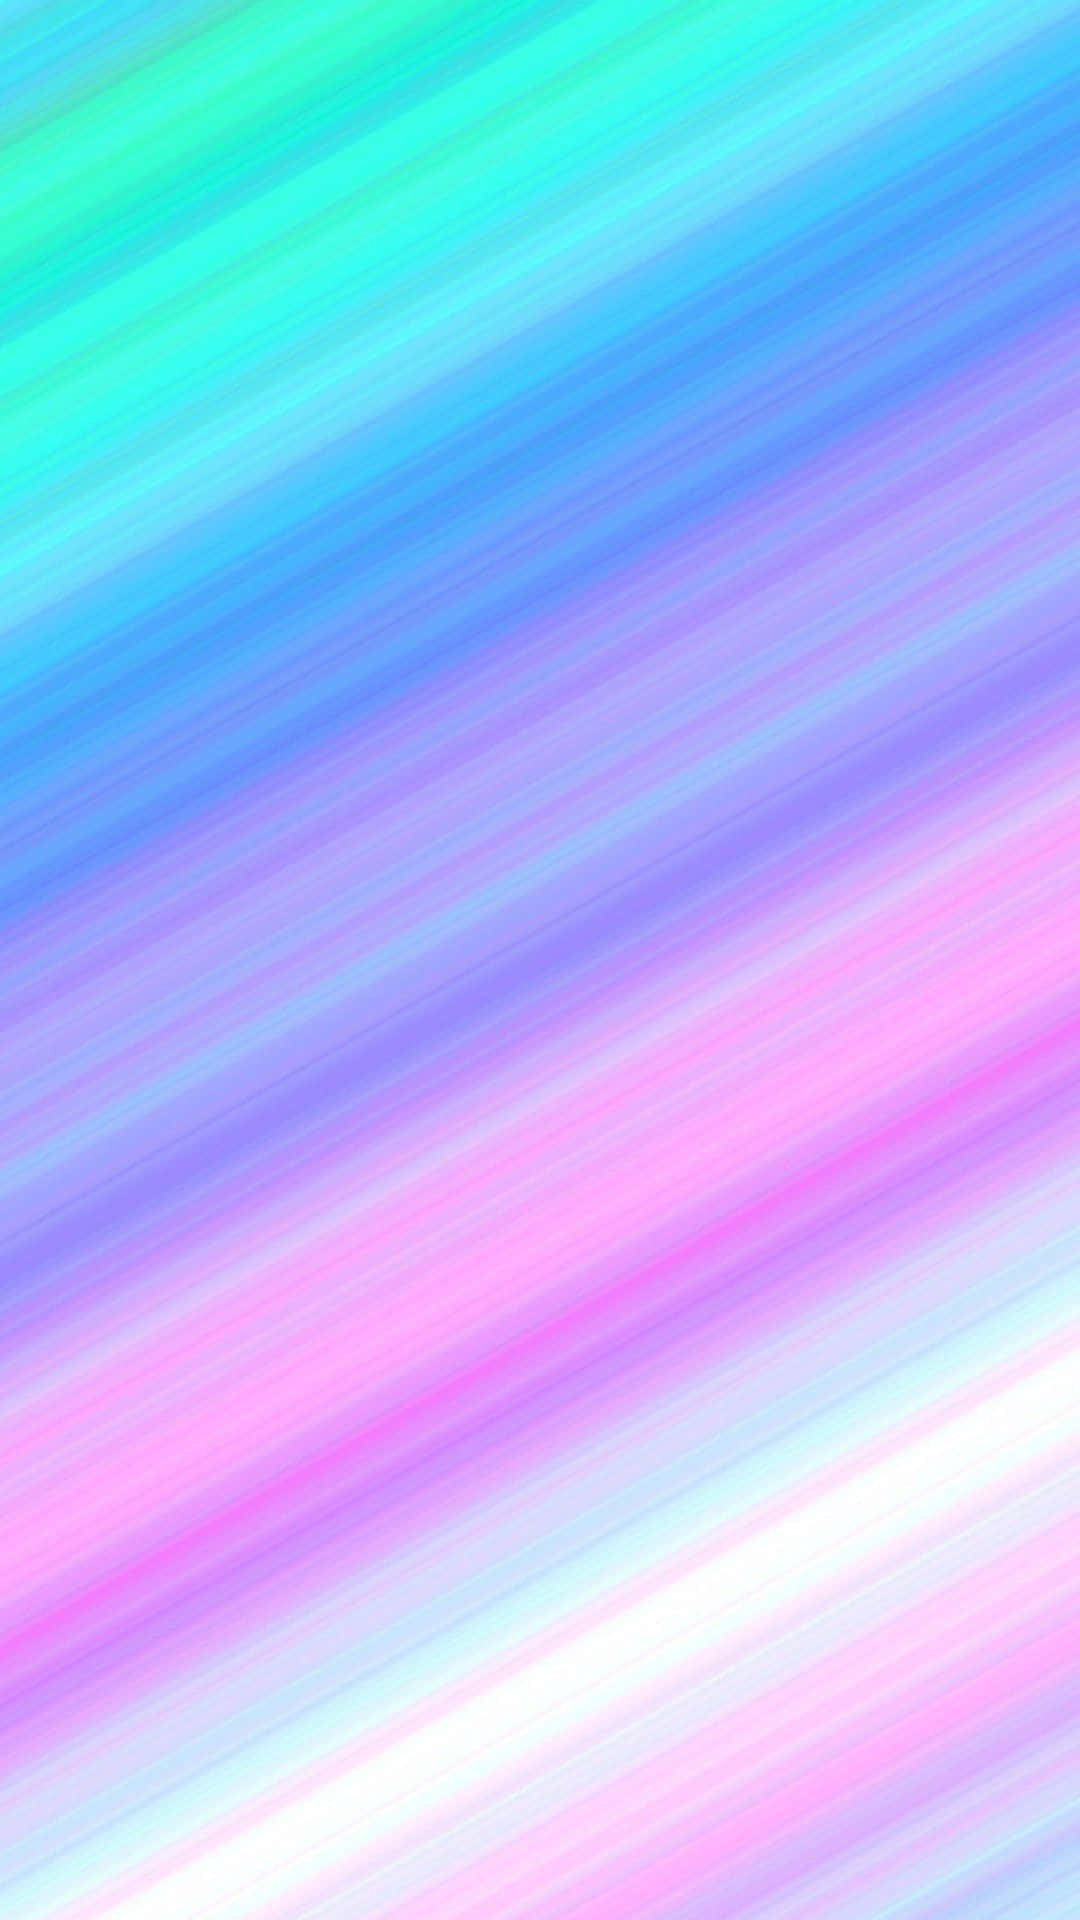 A beautiful abstract background of colorful blues and pinks.